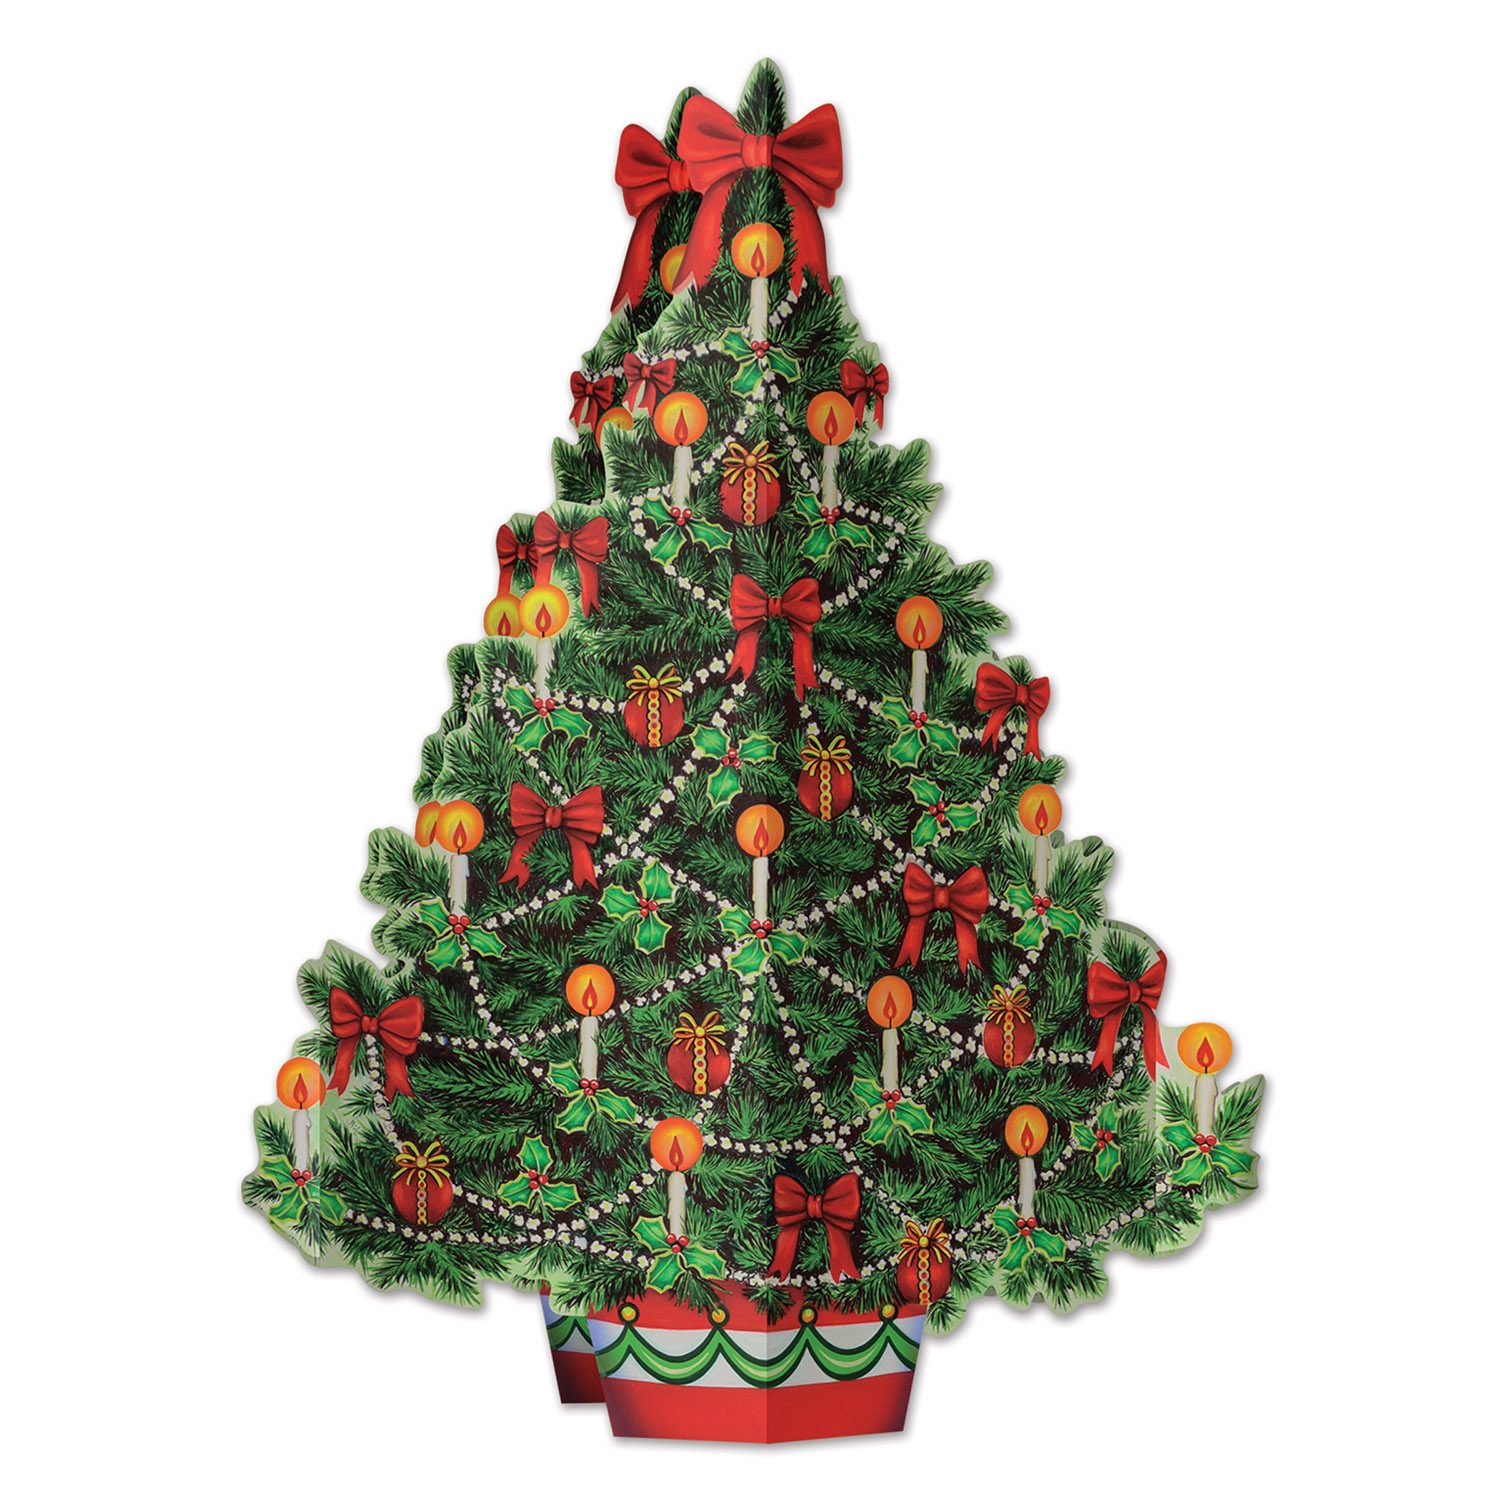 12 Wholesale 3-D Christmas Tree Centerpiece Assembly Required